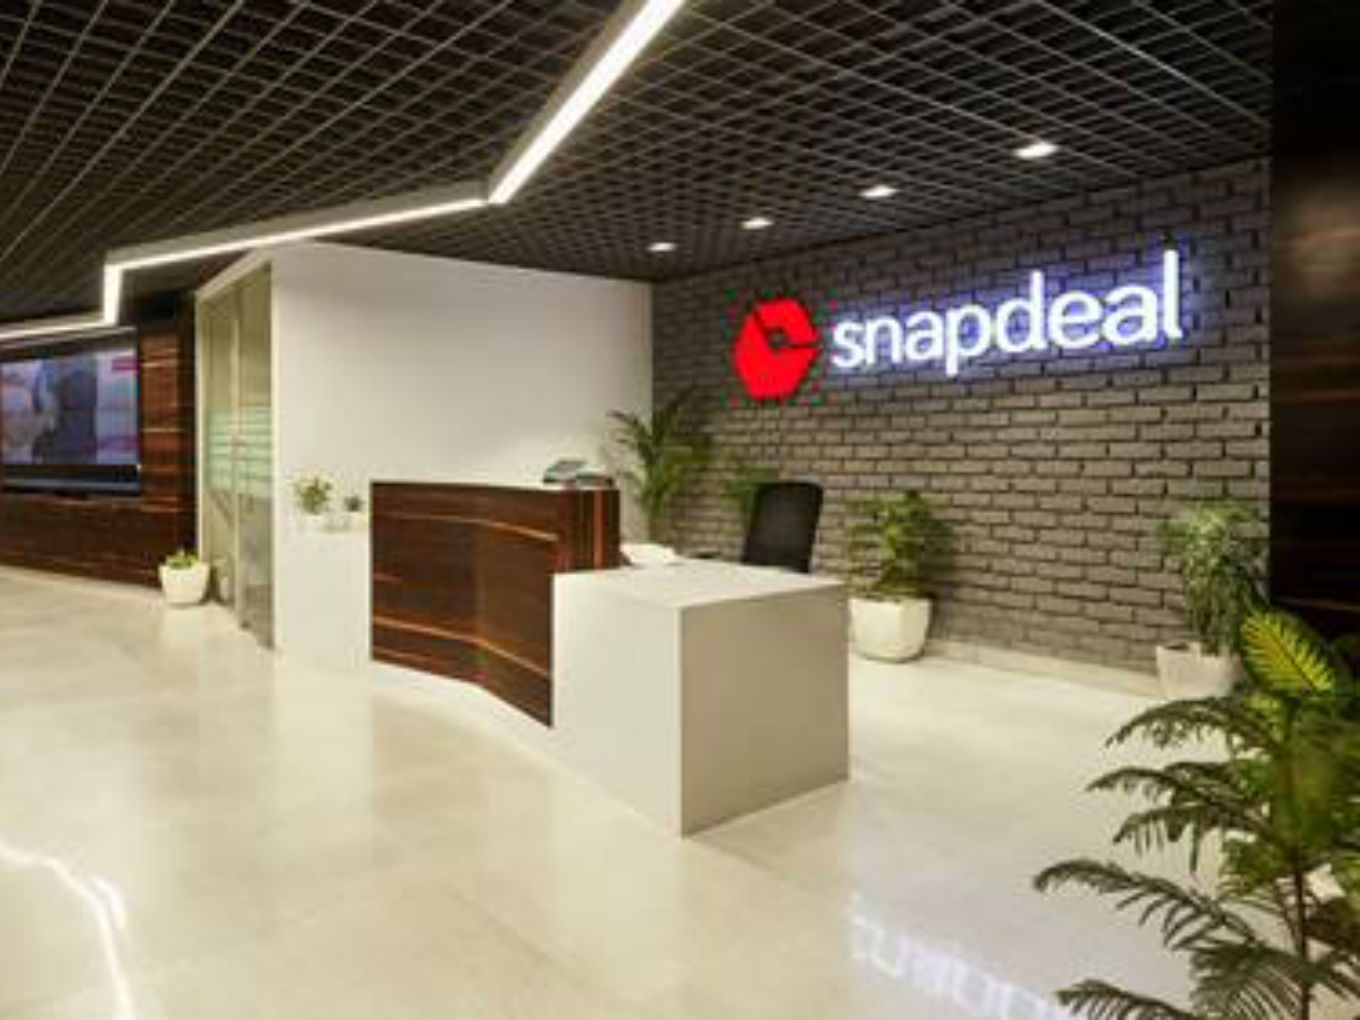 Breaking: Snapdeal Raises Fresh Funding From Anand Piramal